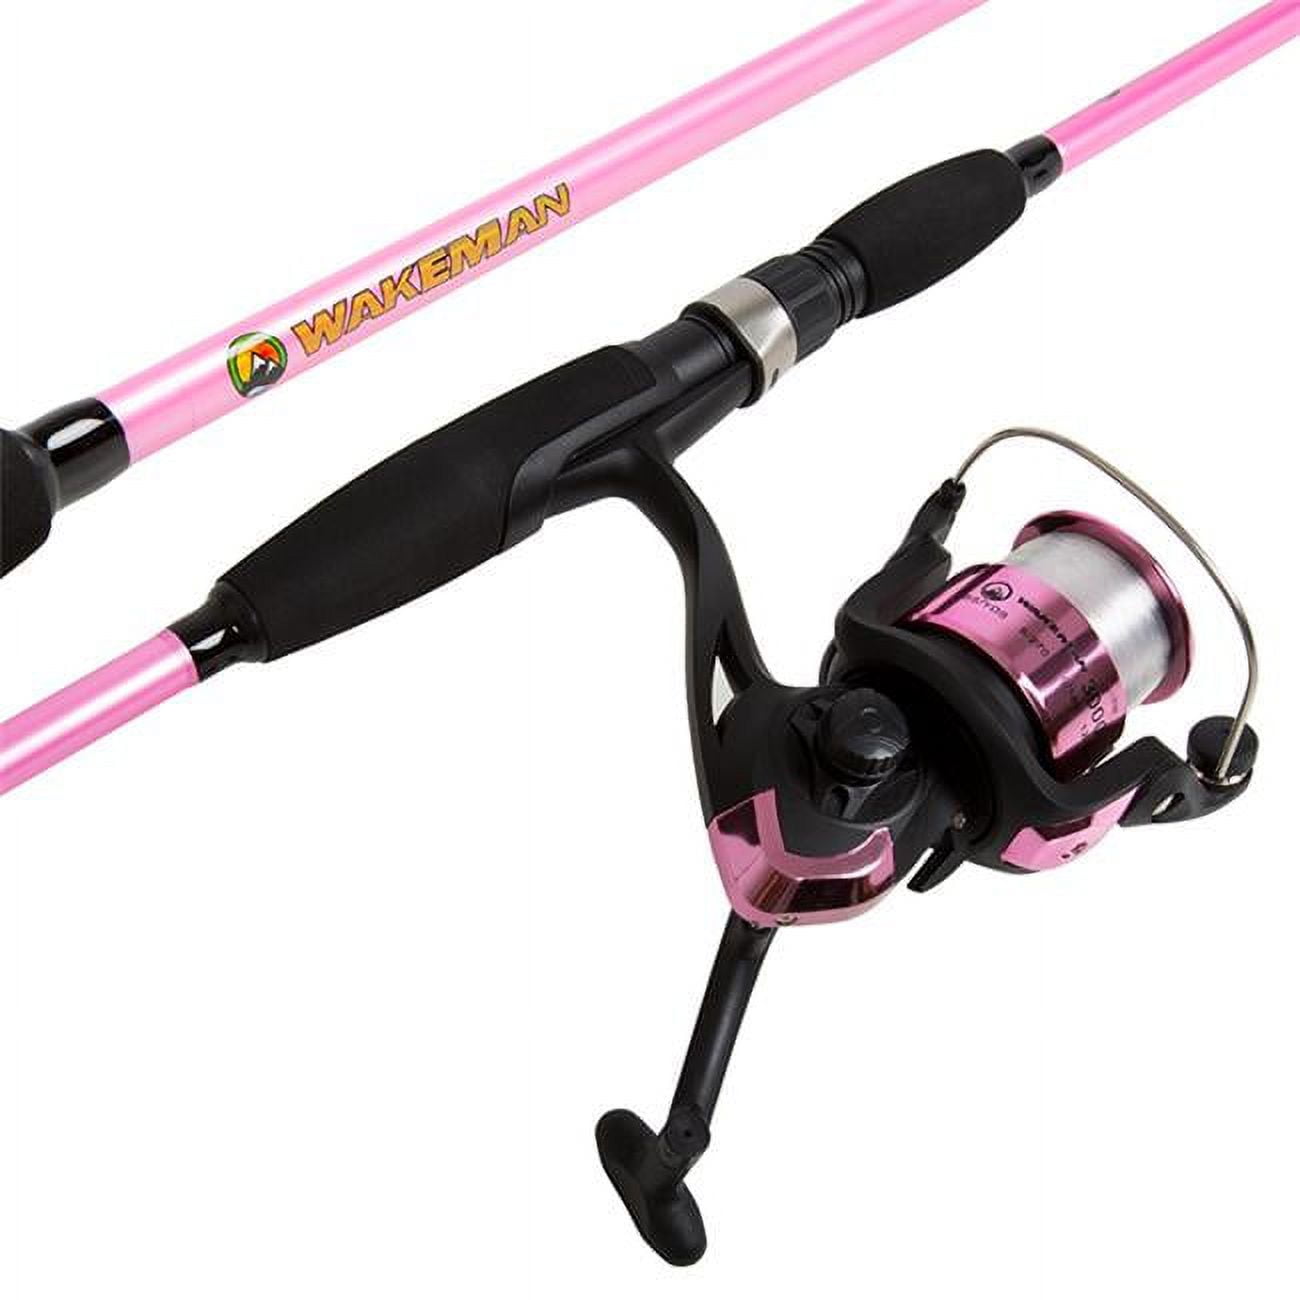 78 in. Pole Black Fiberglass Rod and Reel Combo Medium Action, Size 30 Spinning Reel for Lake Fishing (2-Piece)